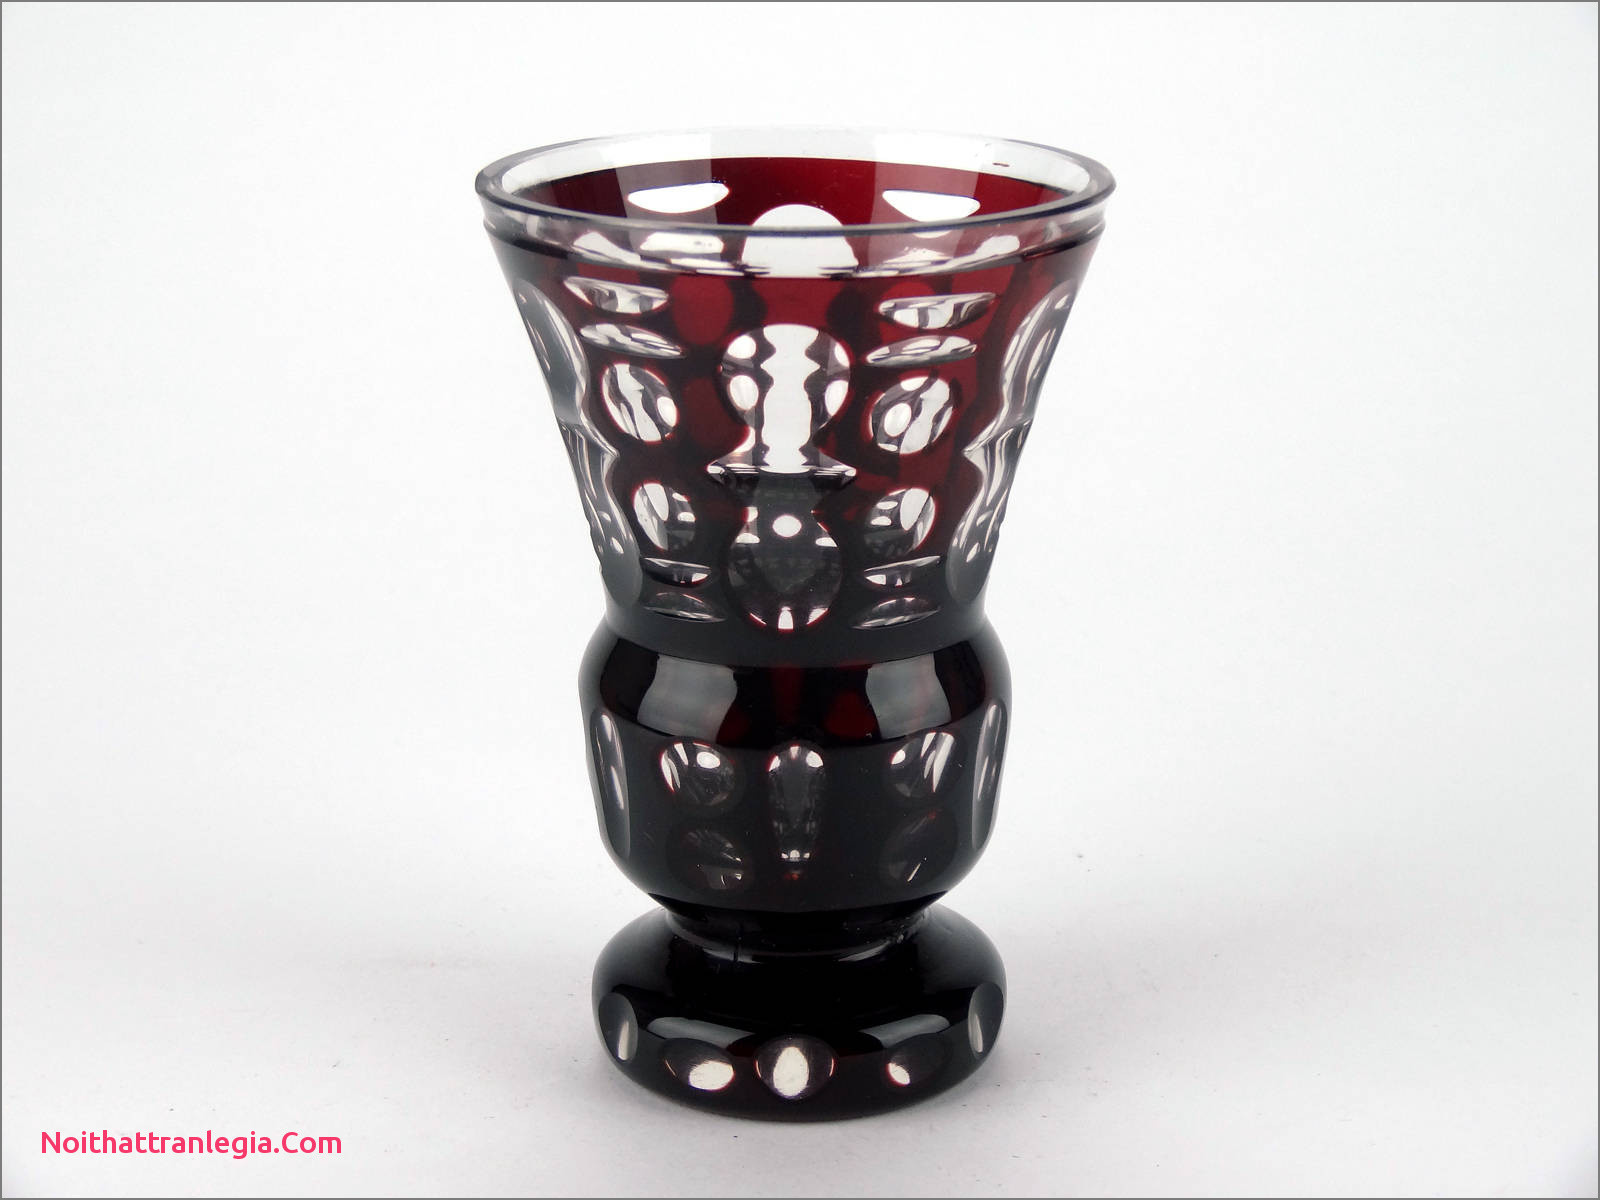 26 attractive Large Glass Goblet Vase 2022 free download large glass goblet vase of 20 cut glass antique vase noithattranlegia vases design for antique c1910 bohemian cut to clear red glass vase czech ruby red cut glass goblet